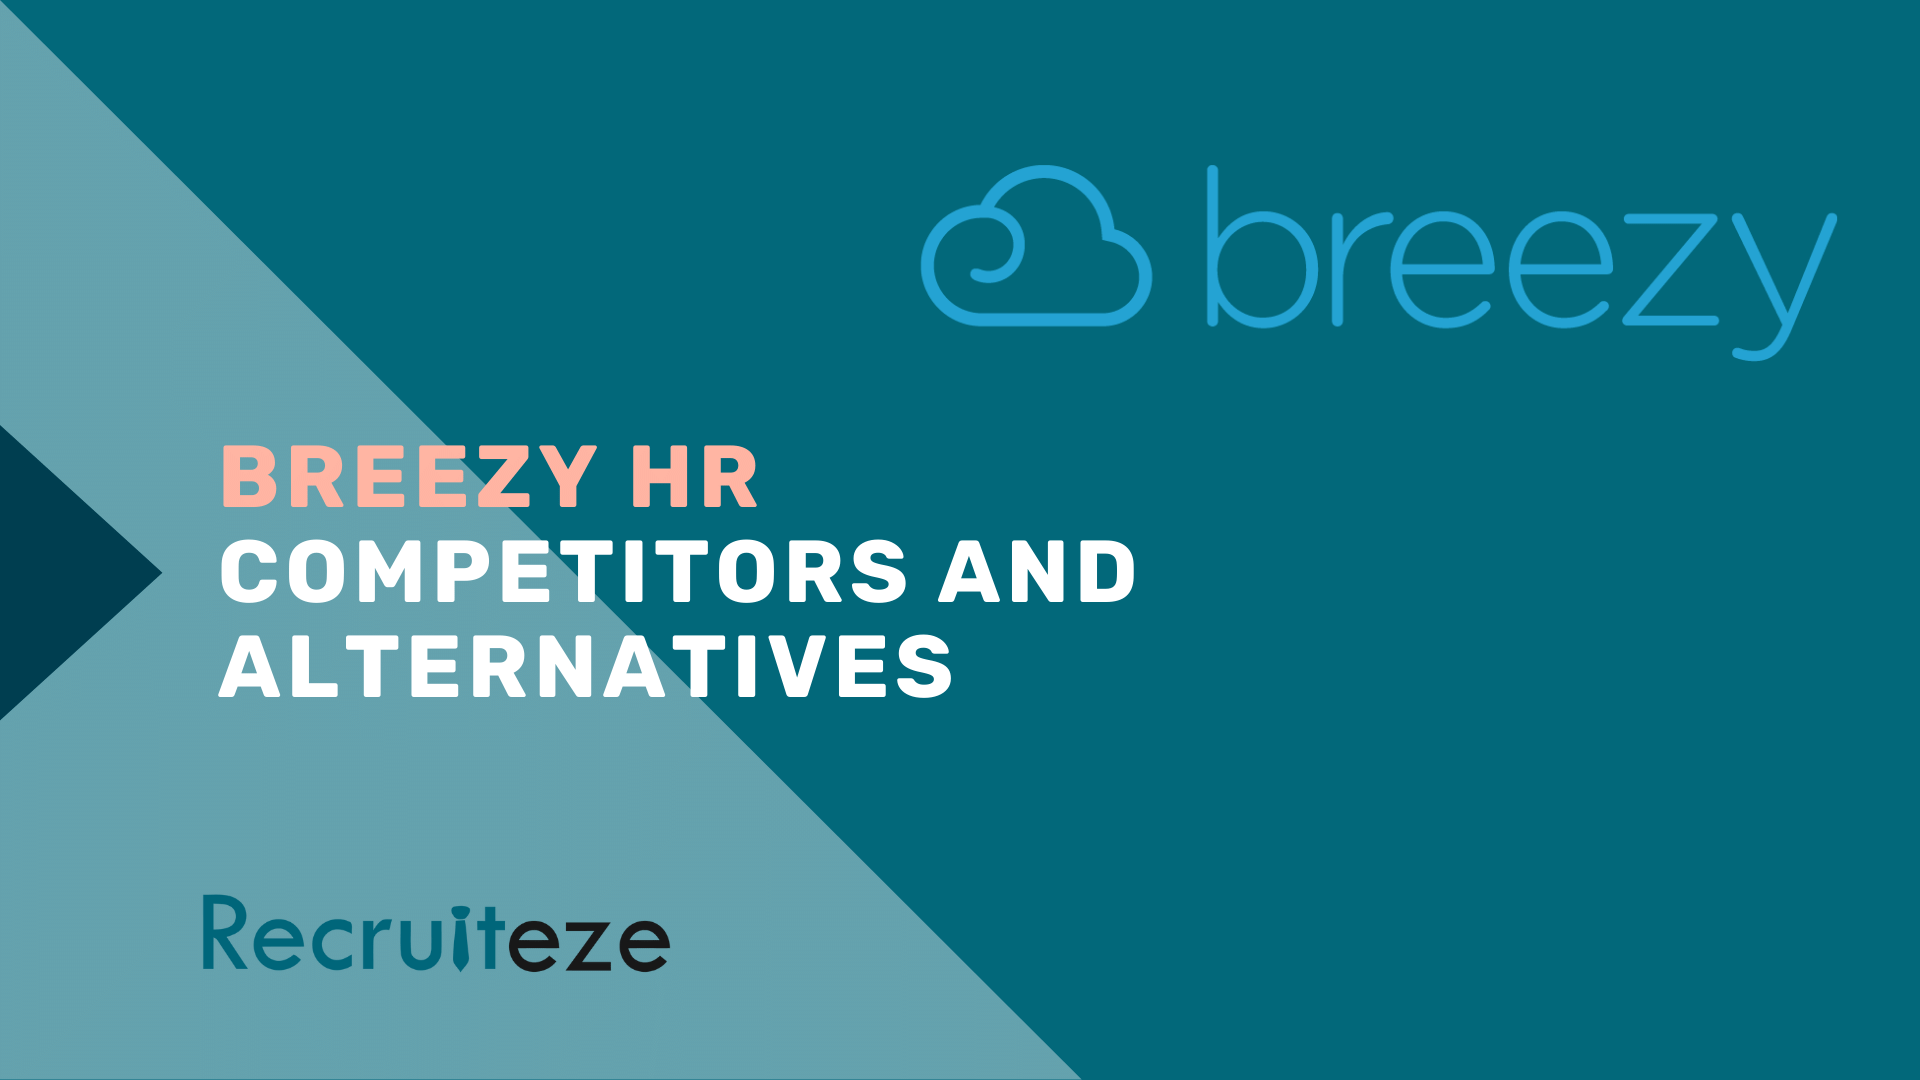 Breezy HR Alternatives and Competitors